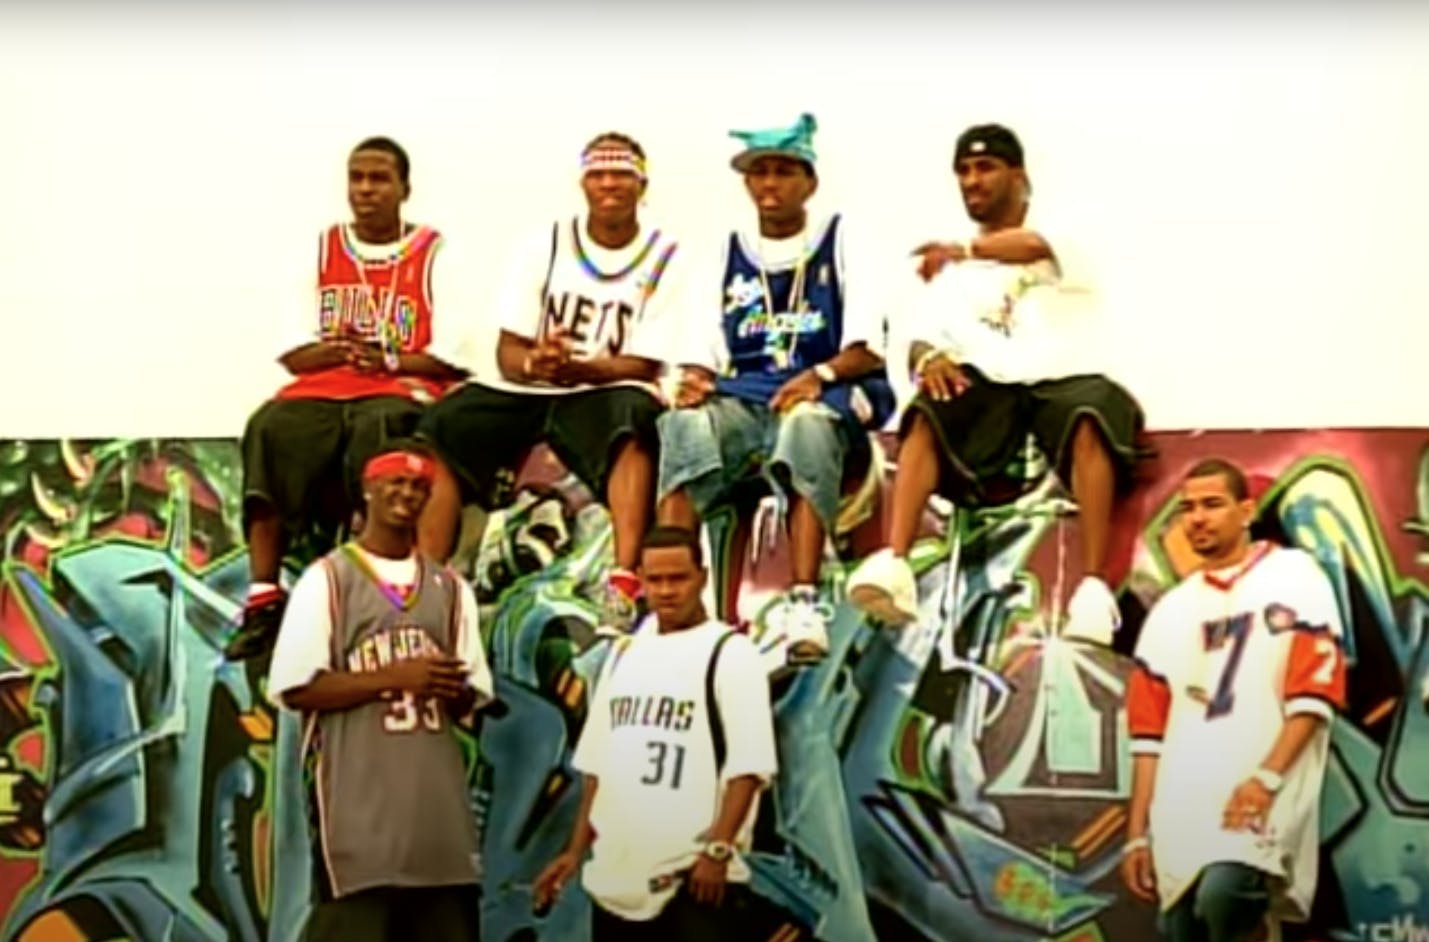 The Decades of Hip Hop Fashion – The Late 90's to Early 2000's